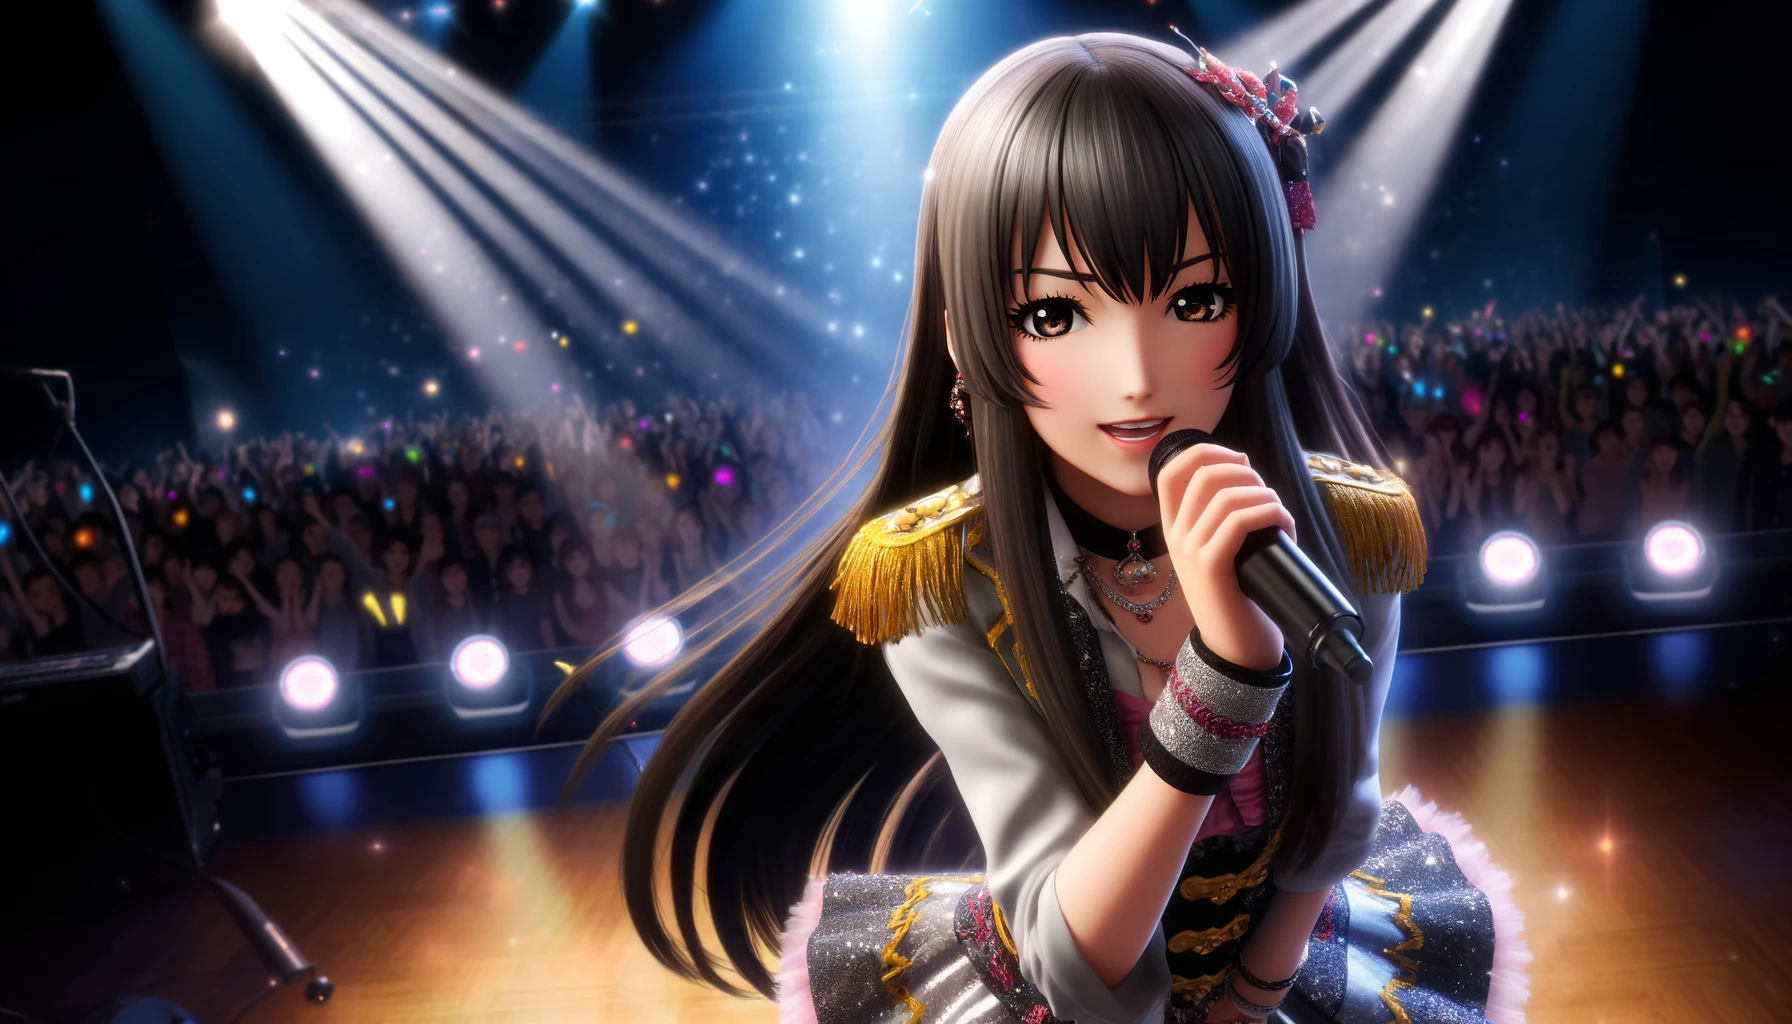 A vibrant stage scene featuring a young Japanese woman resembling a popular idol from a musical group, singing as the center performer. She has long, straight black hair, a fair complexion, and wears a dazzling stage costume, embodying the glamorous style of a pop star. The stage is lit with dramatic lighting, with flashes of colorful spotlights and a cheering crowd in the background. The atmosphere is energetic, with a focus on the idol's dynamic performance, showcasing her charisma and vocal talent. The setting emphasizes the excitement of a live concert.